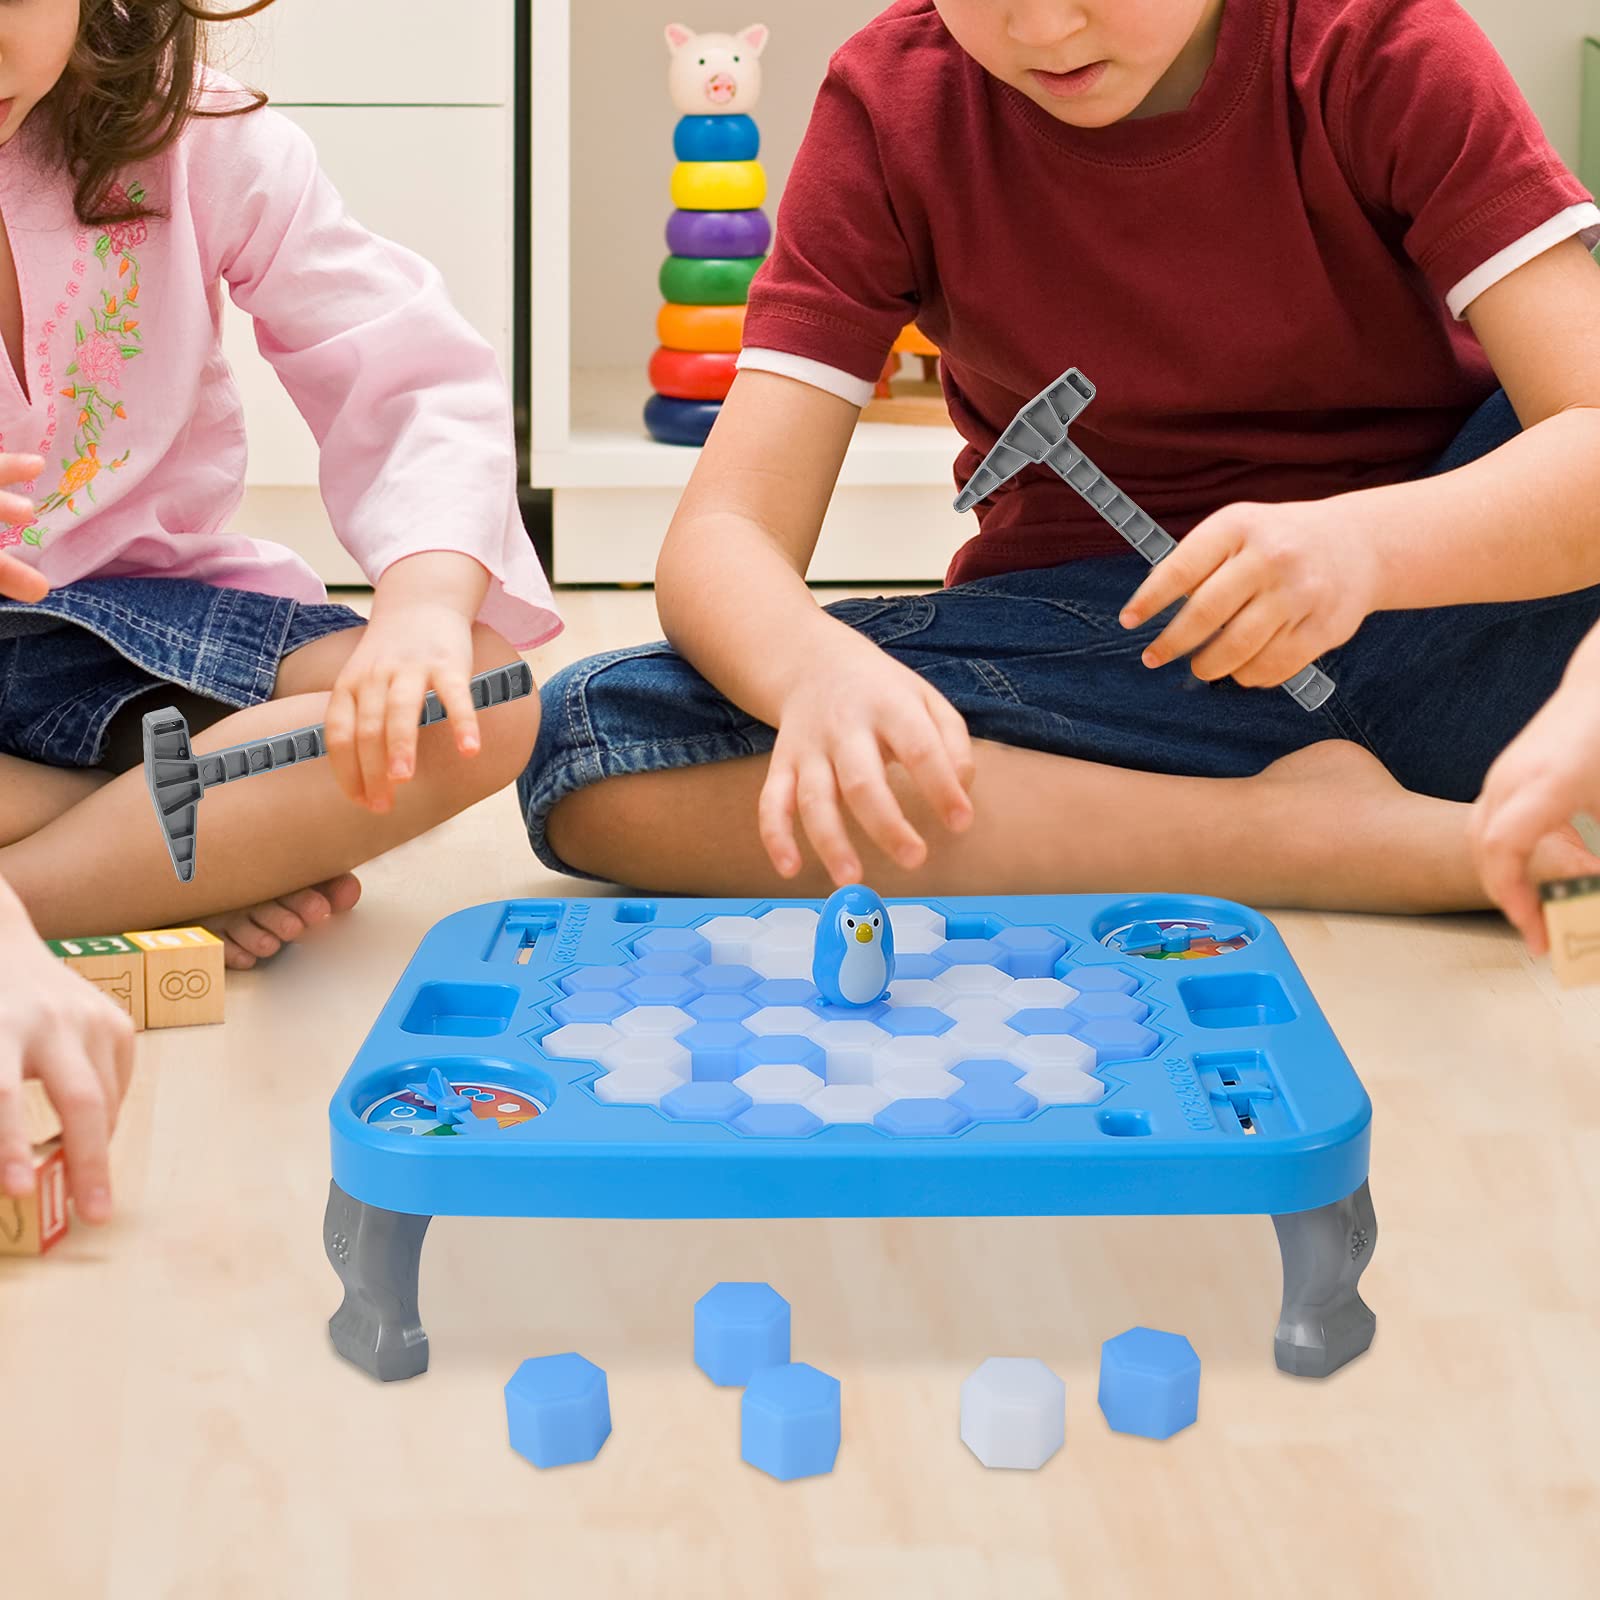 SS Save Penguin On Ice Game, Penguin Trap Break ice Activate Family Party Ice Breaking Kids Puzzle Table Knock Block